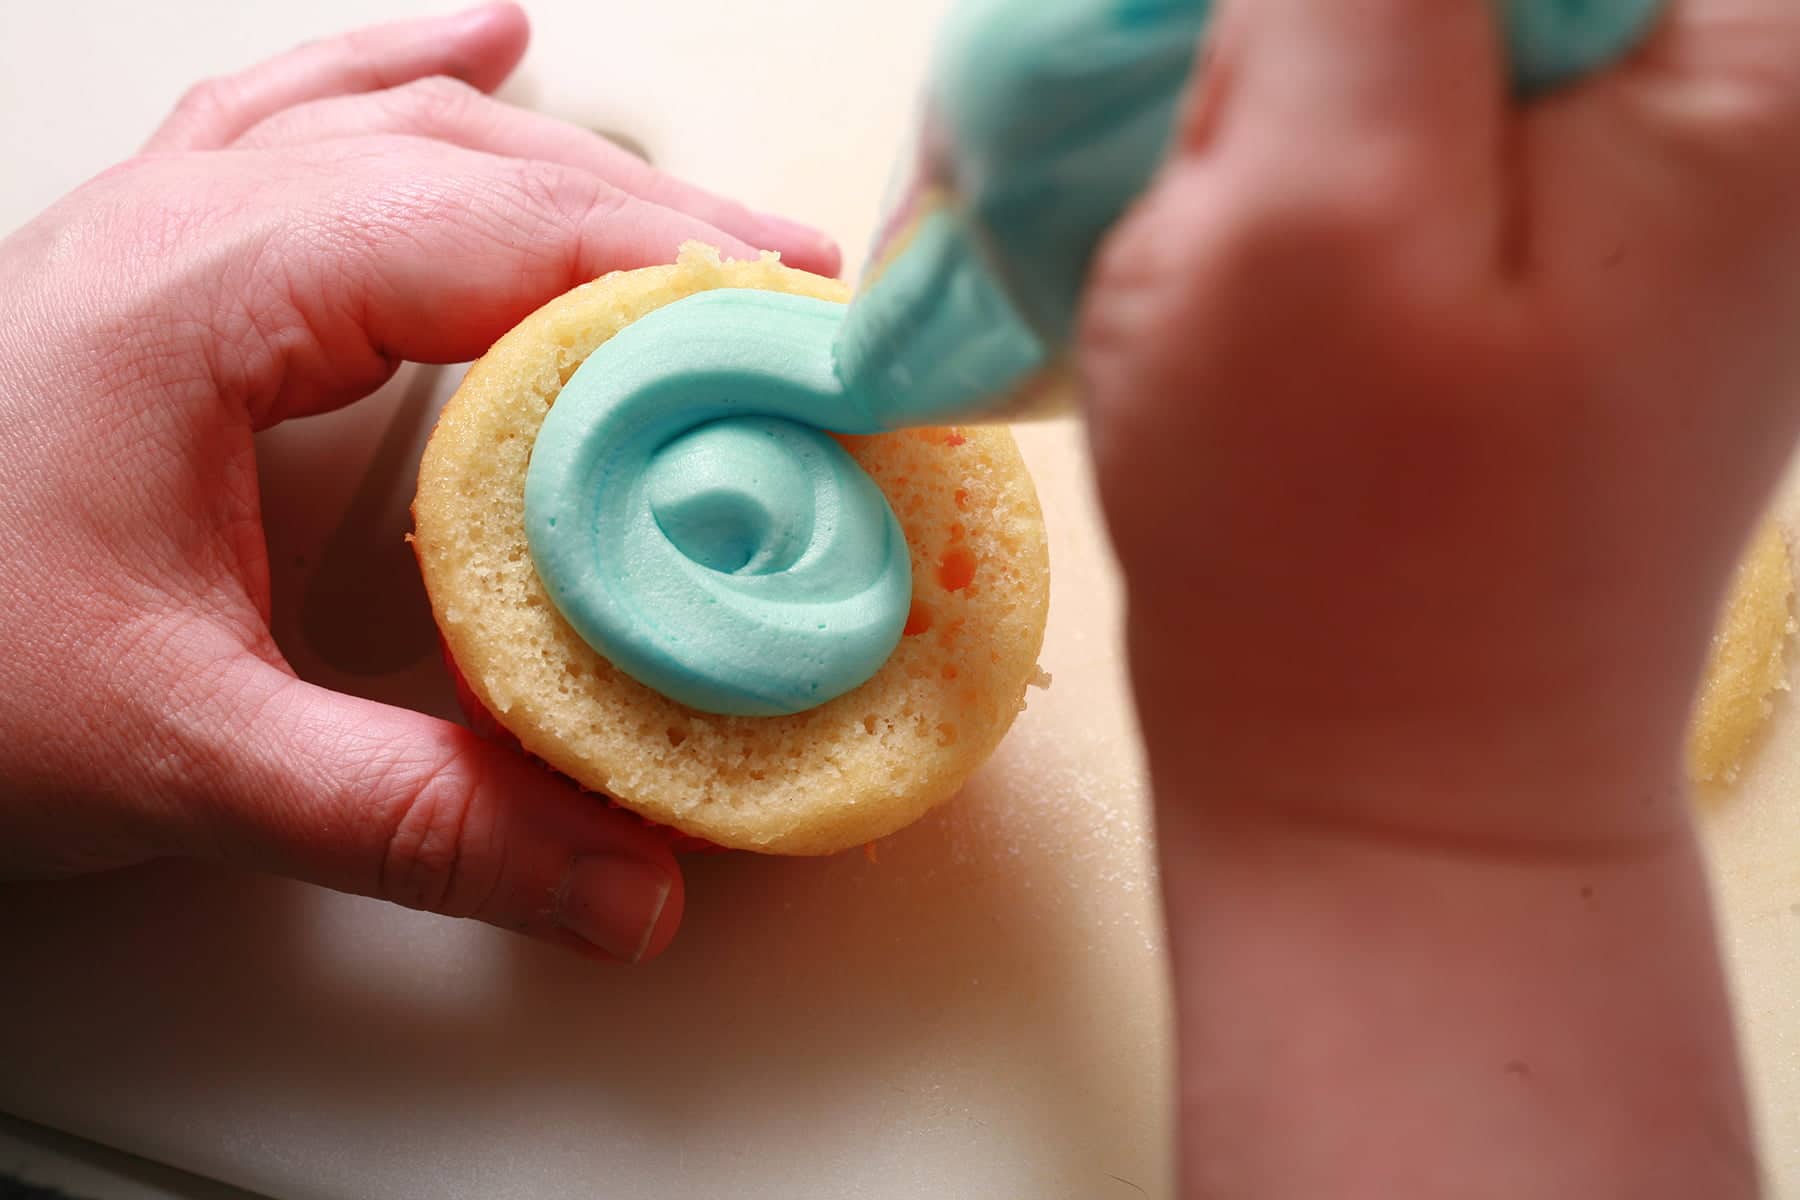 Teal frosting is being piped onto a vanilla cupcake with the top cut off it.